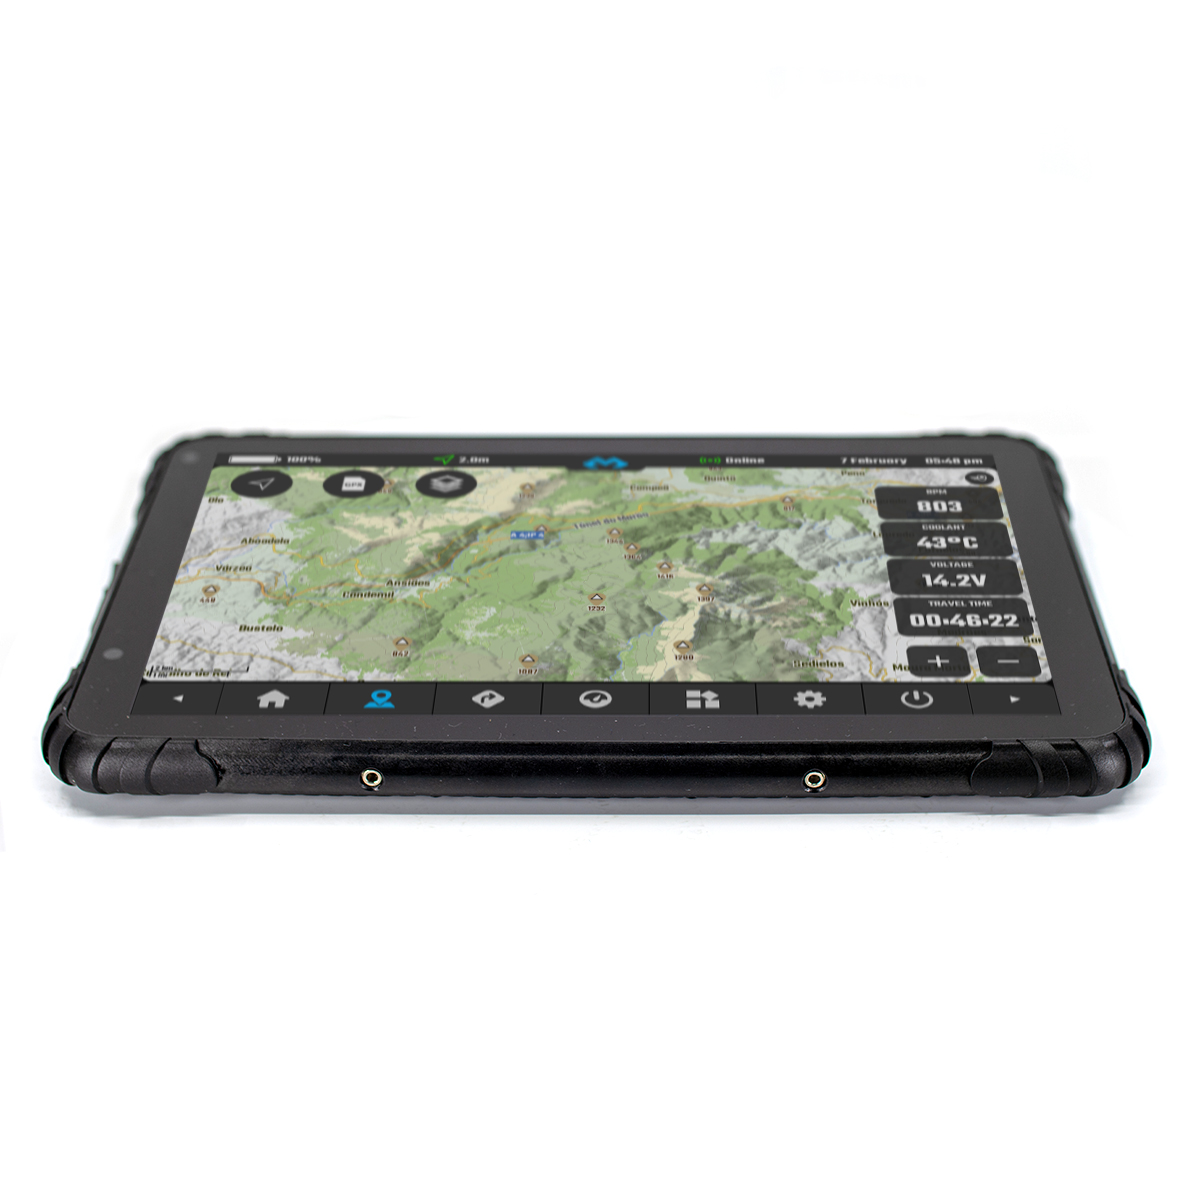 DMD-T865 Navigation Android Rugged Tablet with DMD2